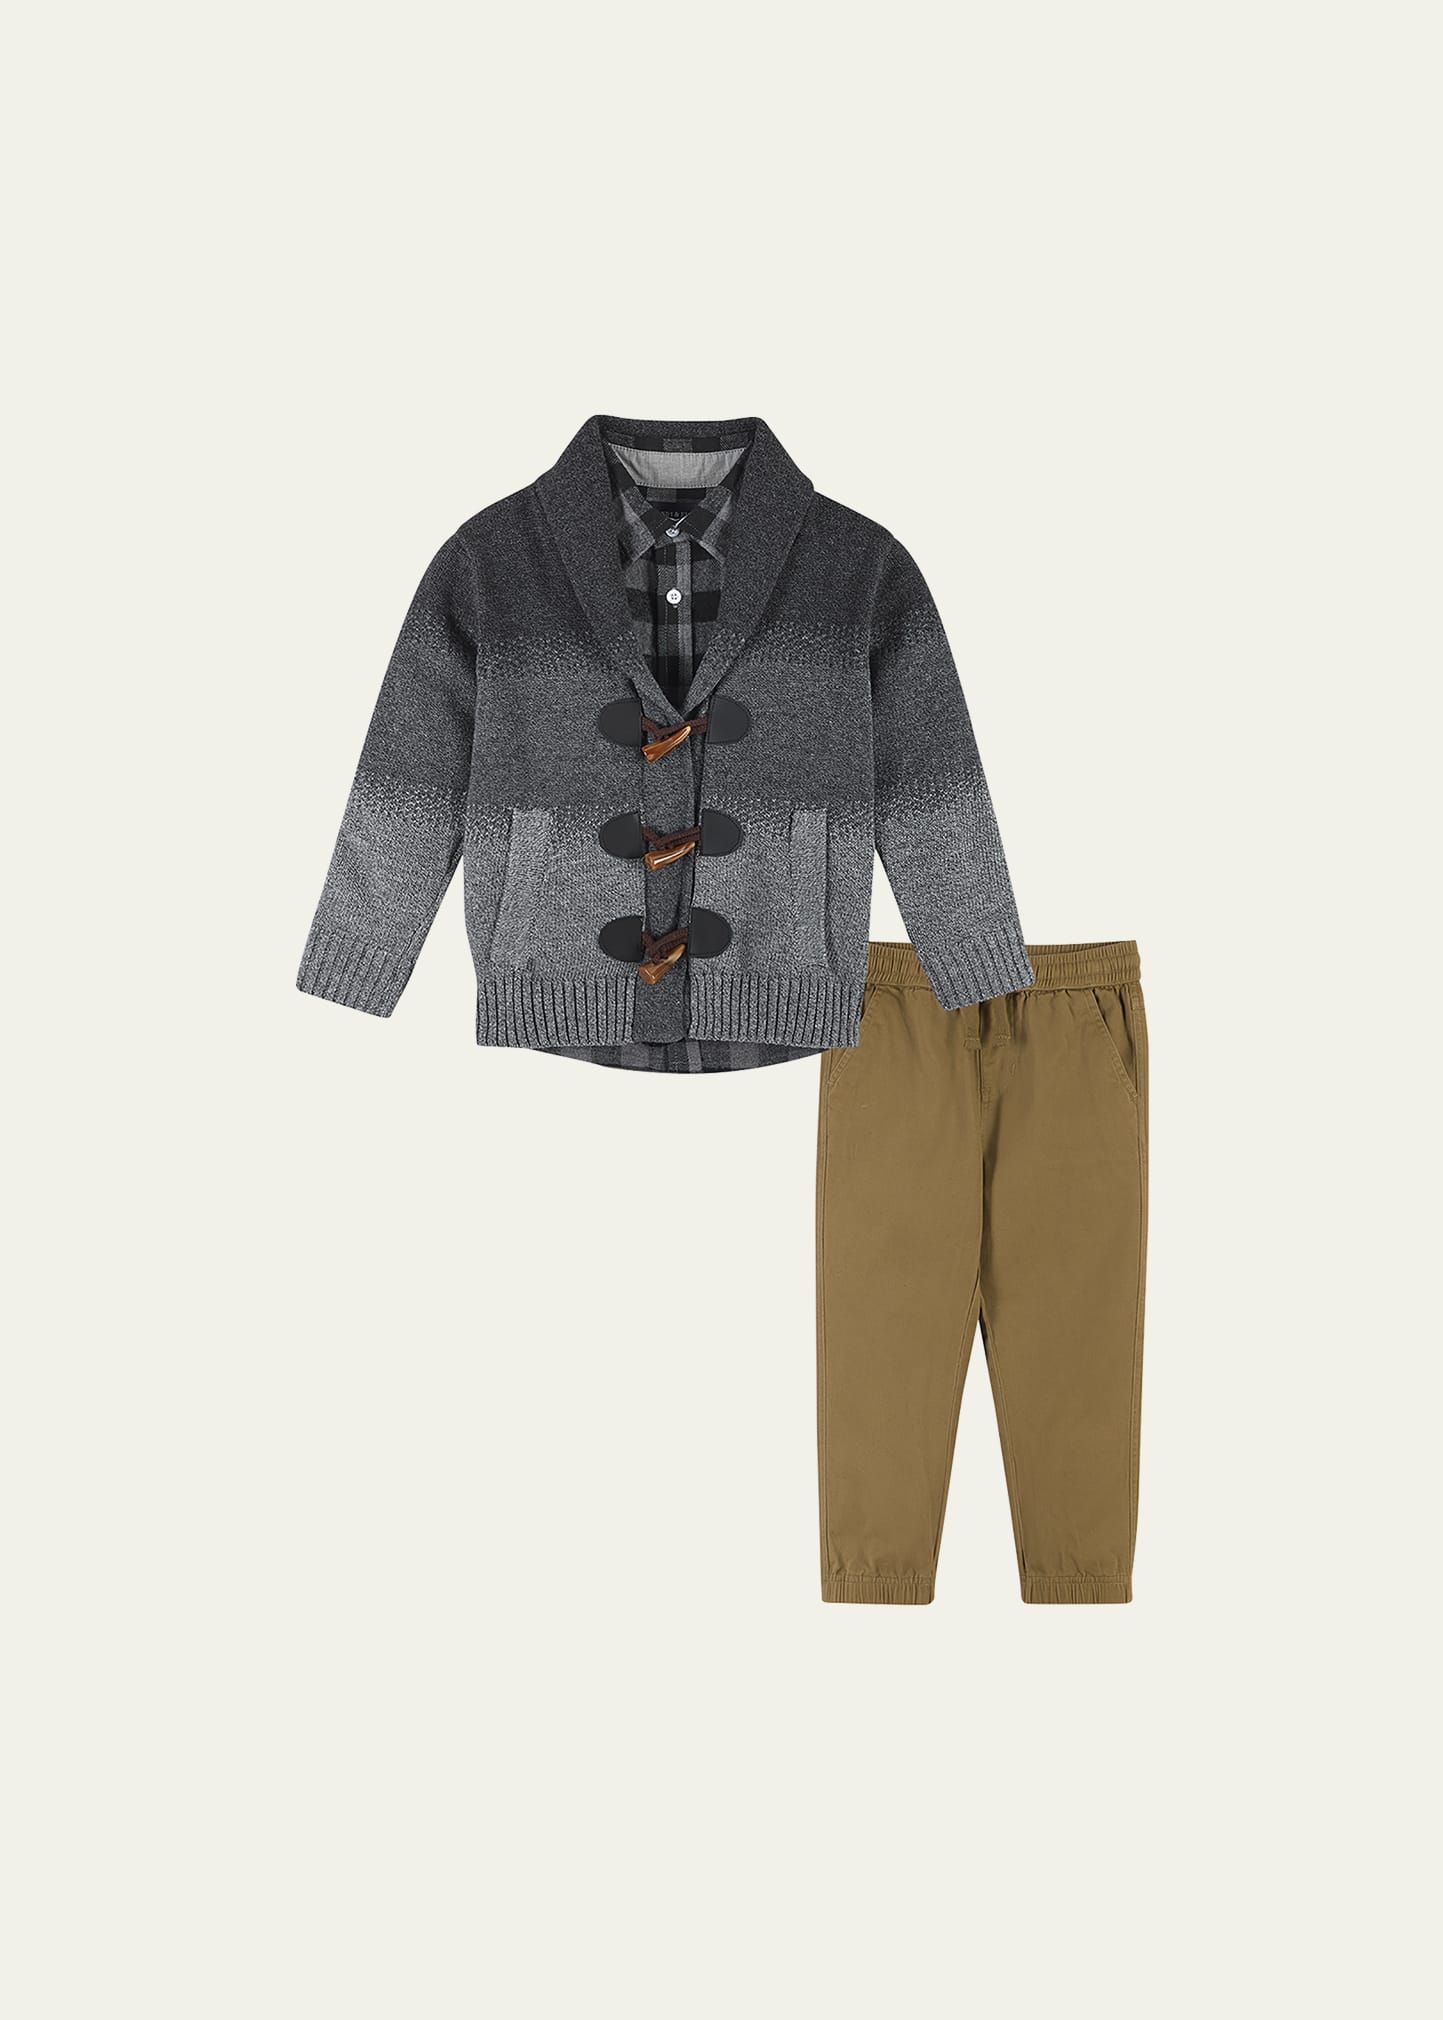 ANDY & EVAN BOY'S TOGGLE CARDIGAN W/ BUTTON DOWN SHIRT AND PANTS SET